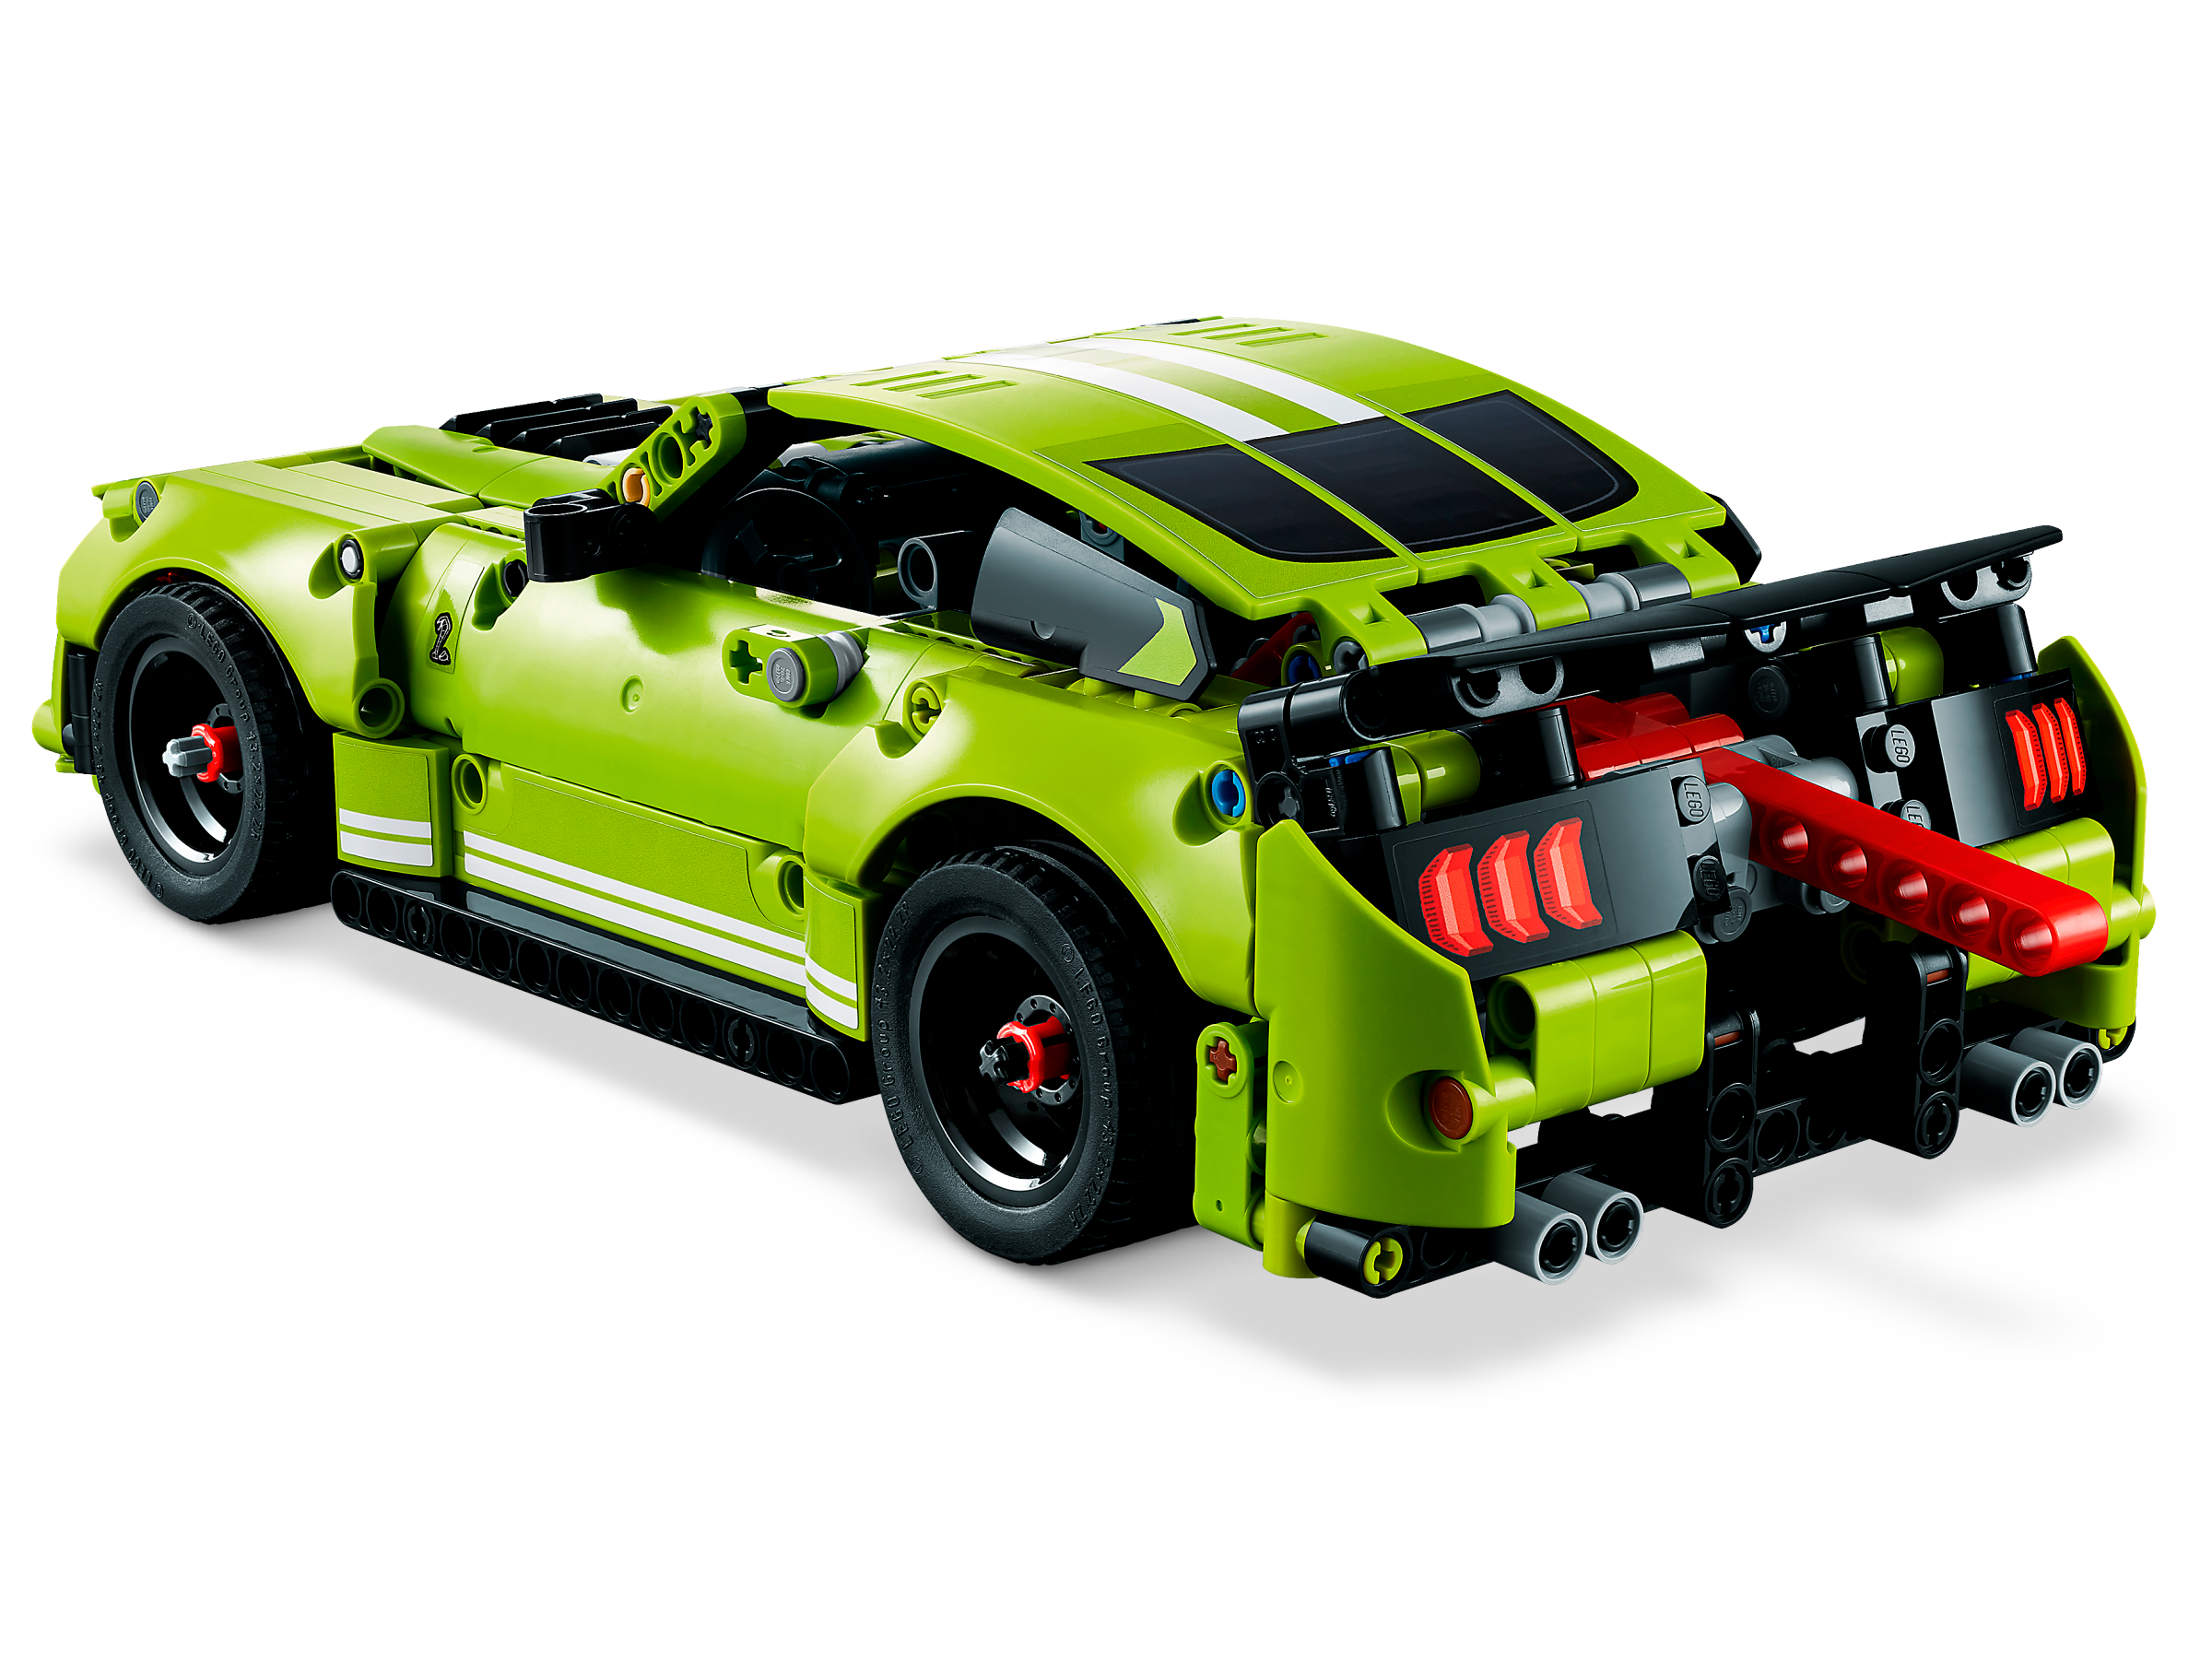 LEGO® Technic™ Ford Mustang Shelby® GT500® – 42138 – LEGOLAND New